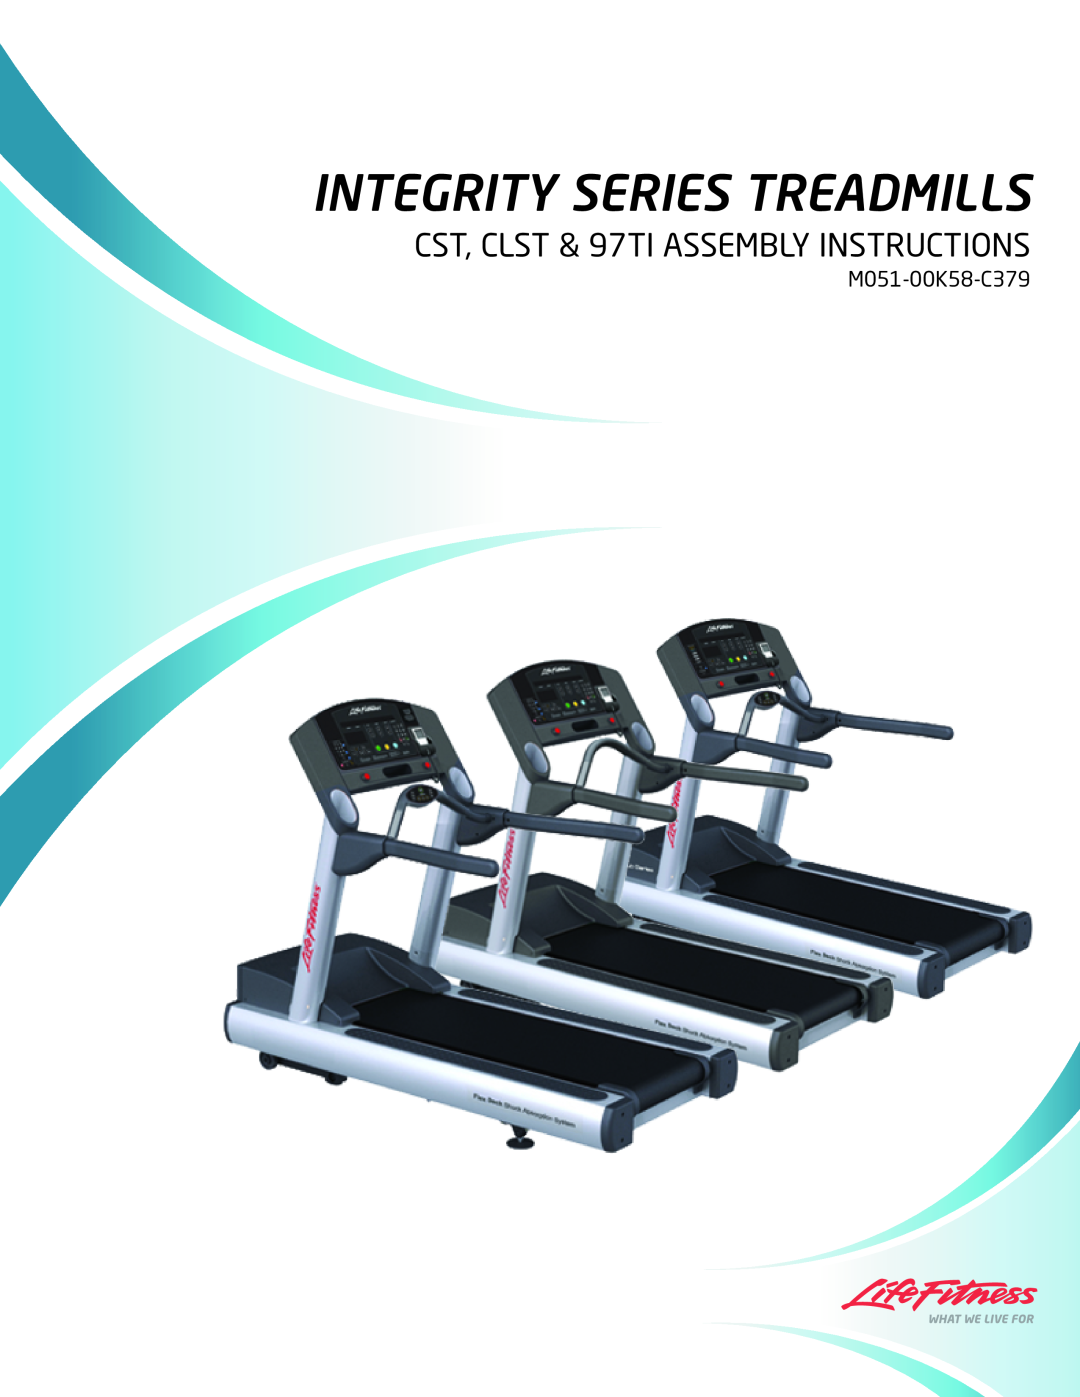 Life Fitness 97Ti manual Integrity Series Treadmills, CST, CLST & 97TI ASSEMBLY INSTRUCTIONS, M051-00K58-C379 